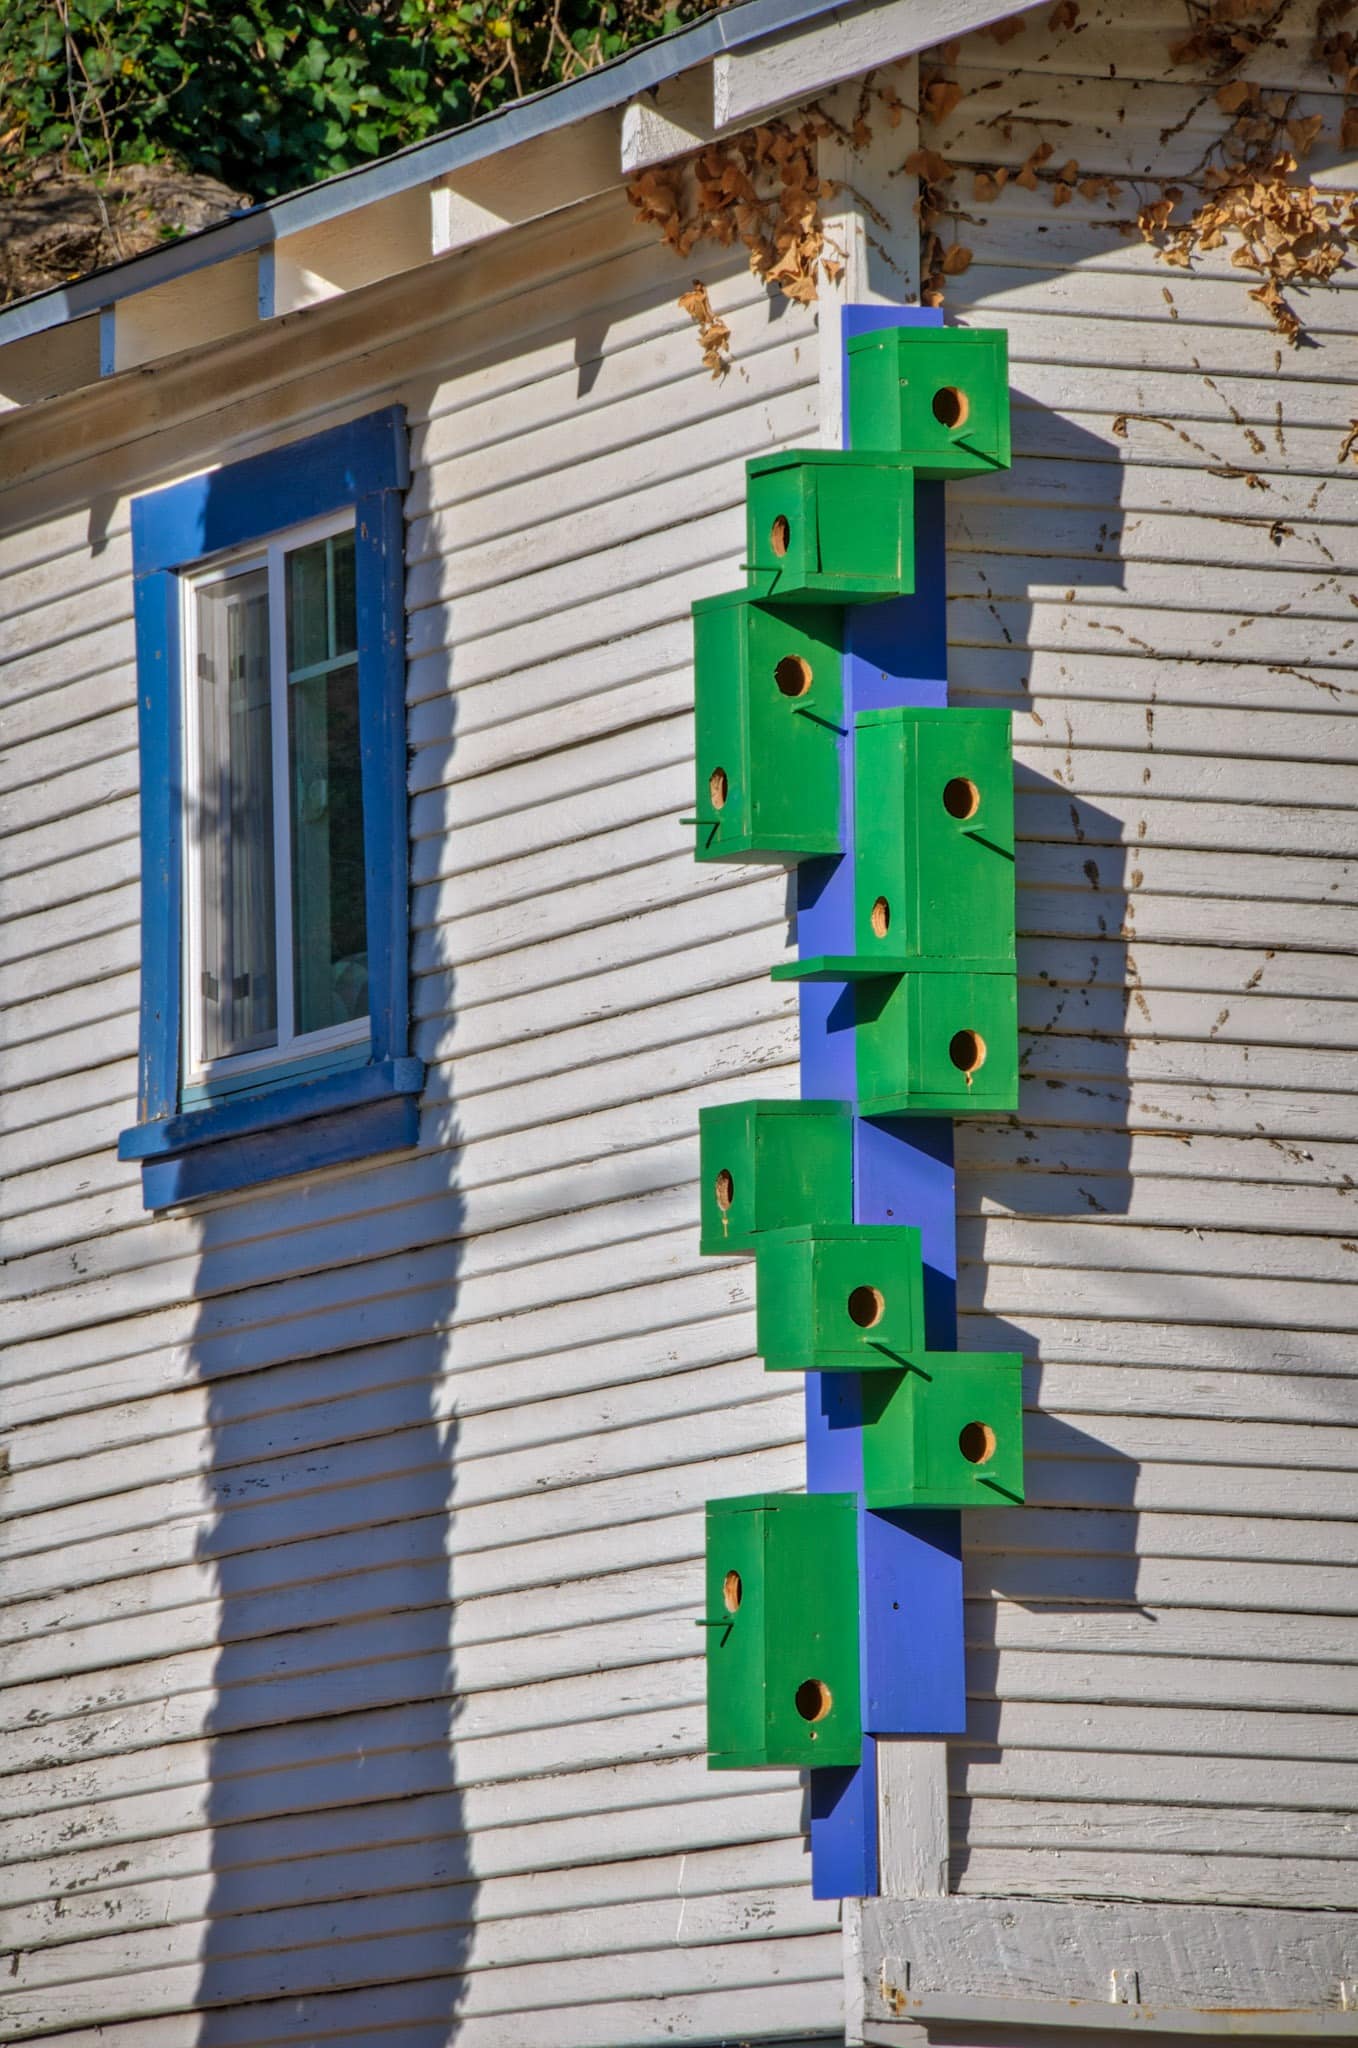 These green birdhouse decorate a corner of a home on Tombstone Canyon Road in Bisbee, Arizona.